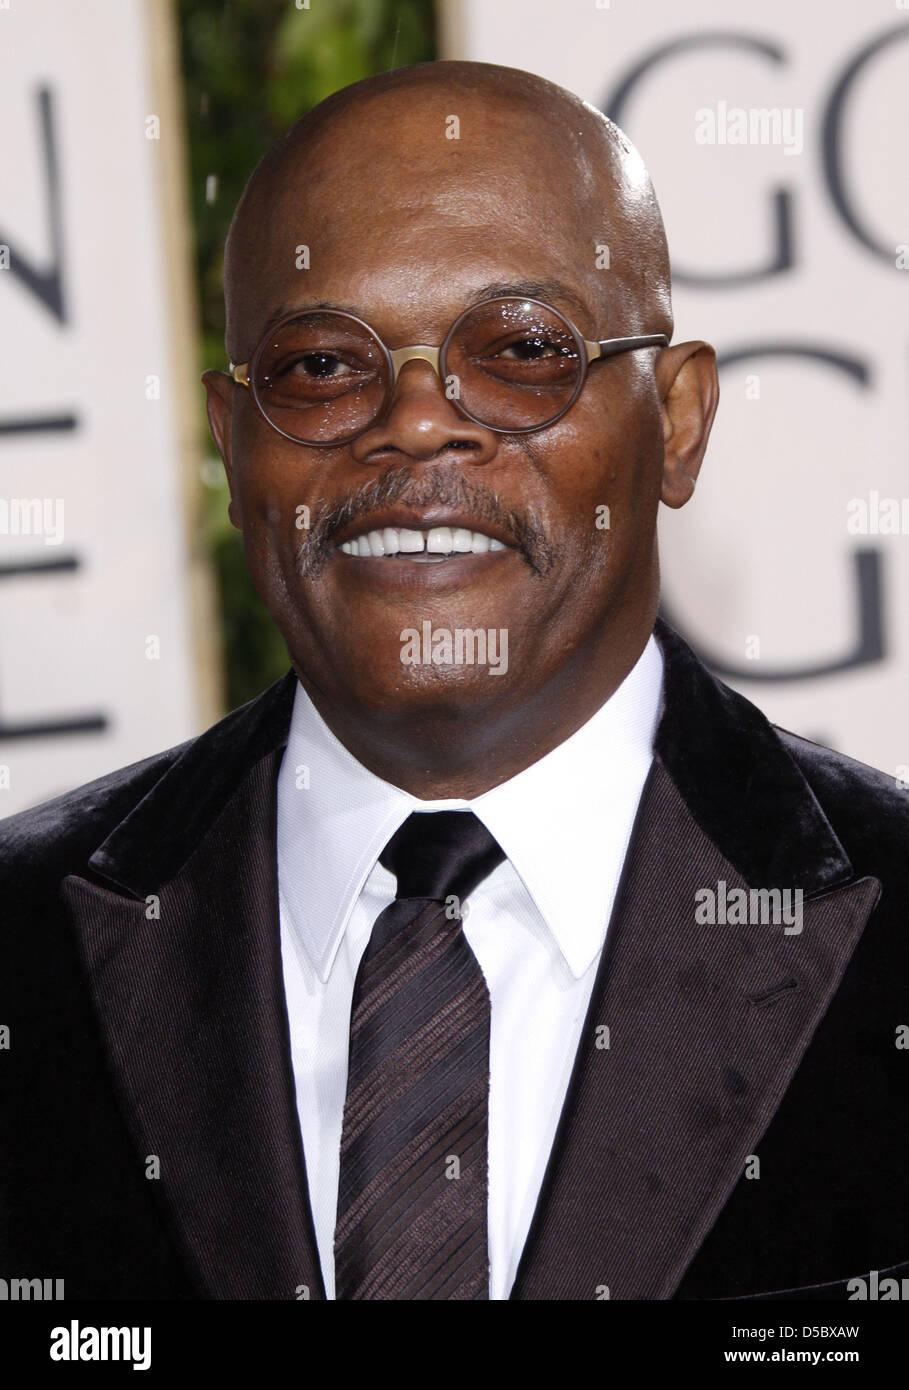 US American actor Samuel L. Jackson arrives for the 67th Golden Globe Awards in Los Angeles, USA, 17 January 2010. The Globes honour excellence in cinema and television. Photo: Hubert Boesl Stock Photo